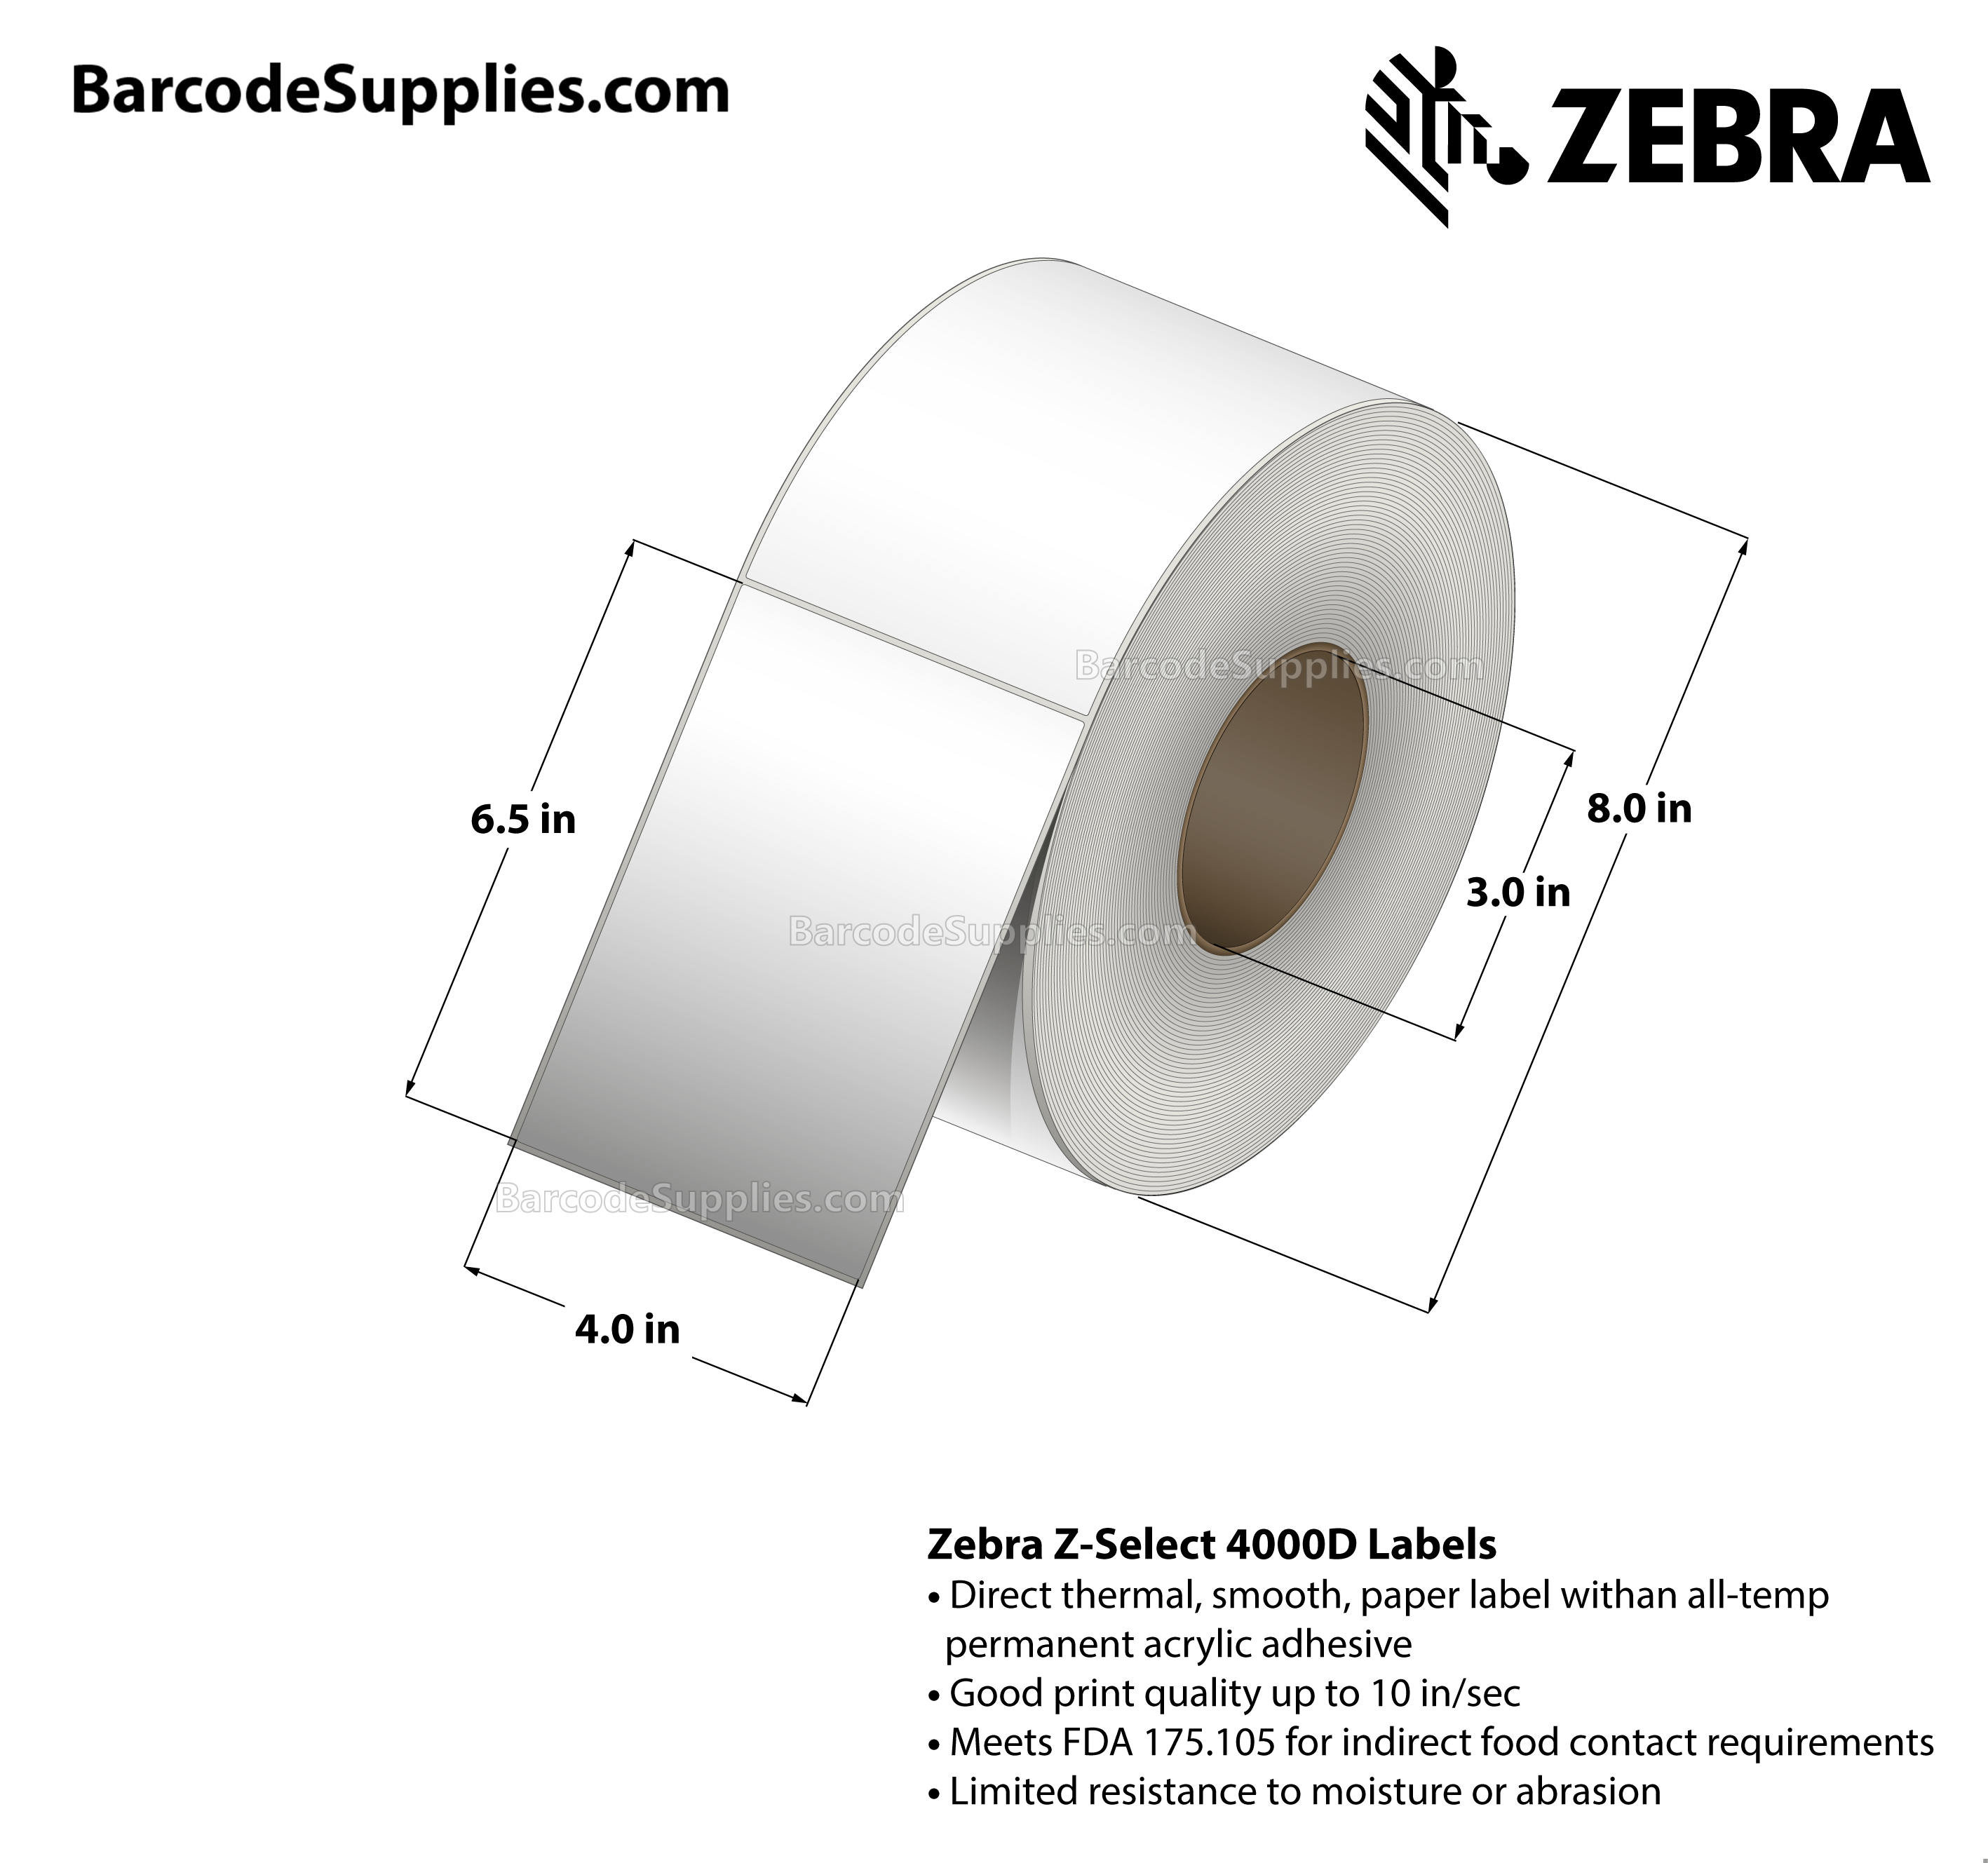 4 x 6.5 Direct Thermal White Z-Select 4000D Labels With All-Temp Adhesive - Not Perforated - 870 Labels Per Roll - Carton Of 4 Rolls - 3480 Labels Total - MPN: 117945